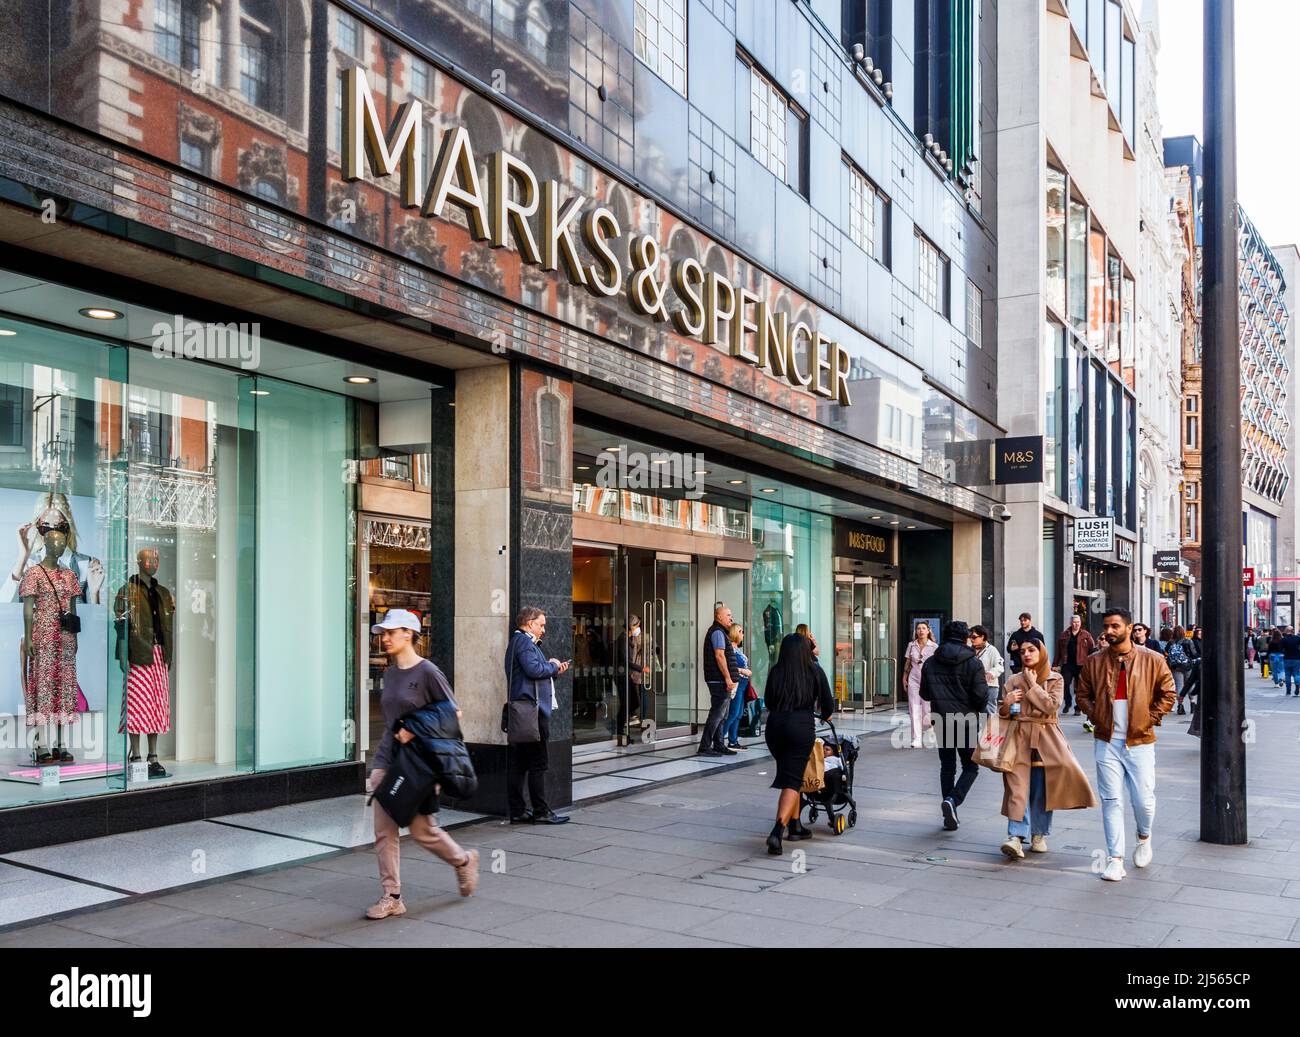 A branch of Marks and Spencer, the retail clothing and food store, on Oxford Street, London, UK Stock Photo